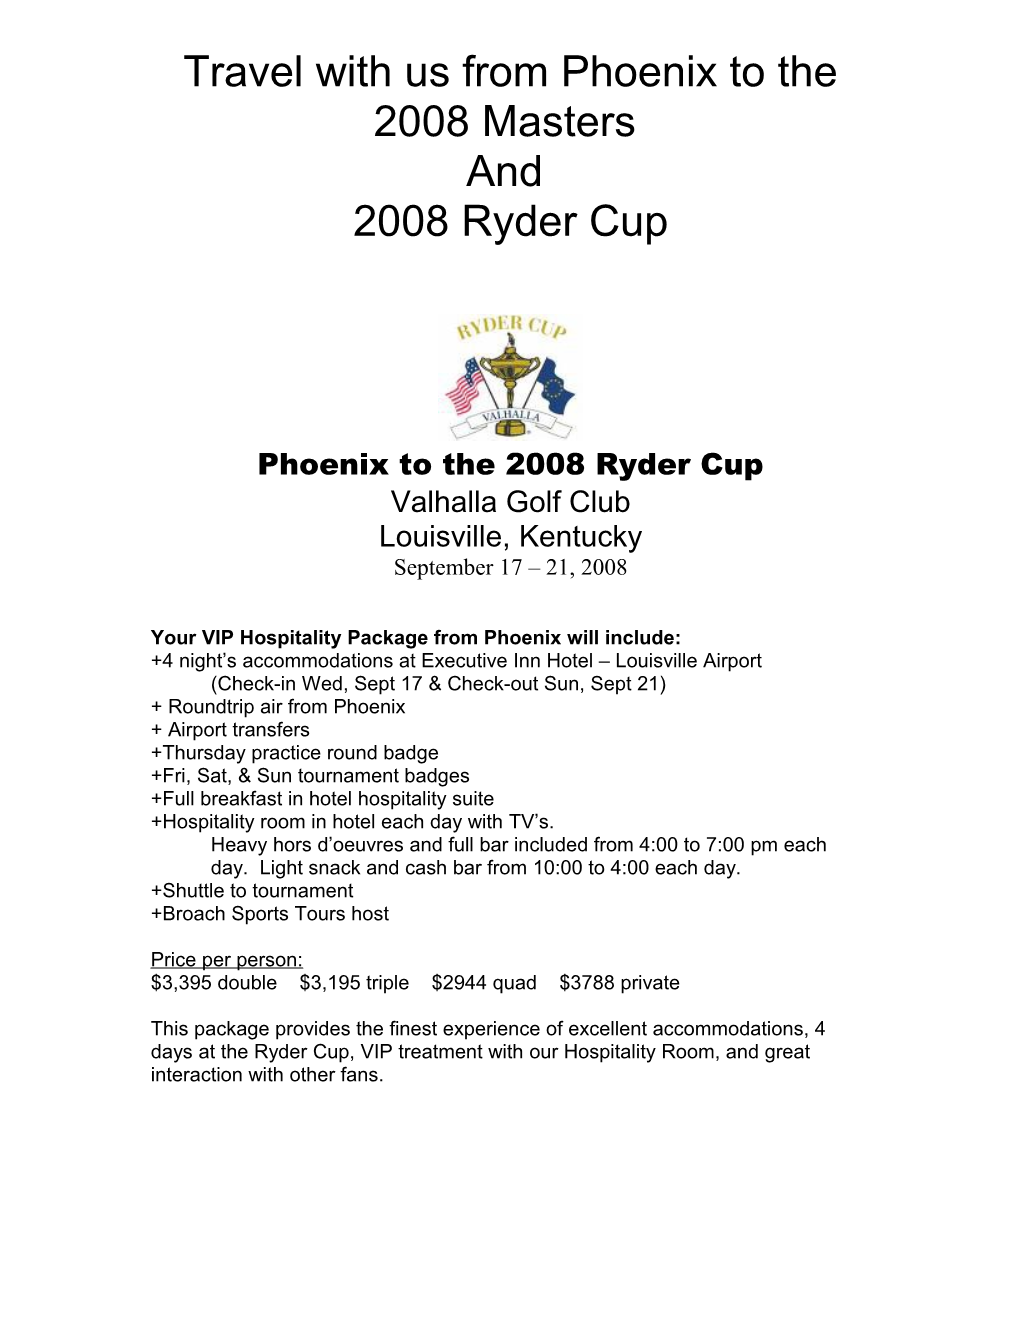 Travel with Us from Phoenix to the 2008 Masters